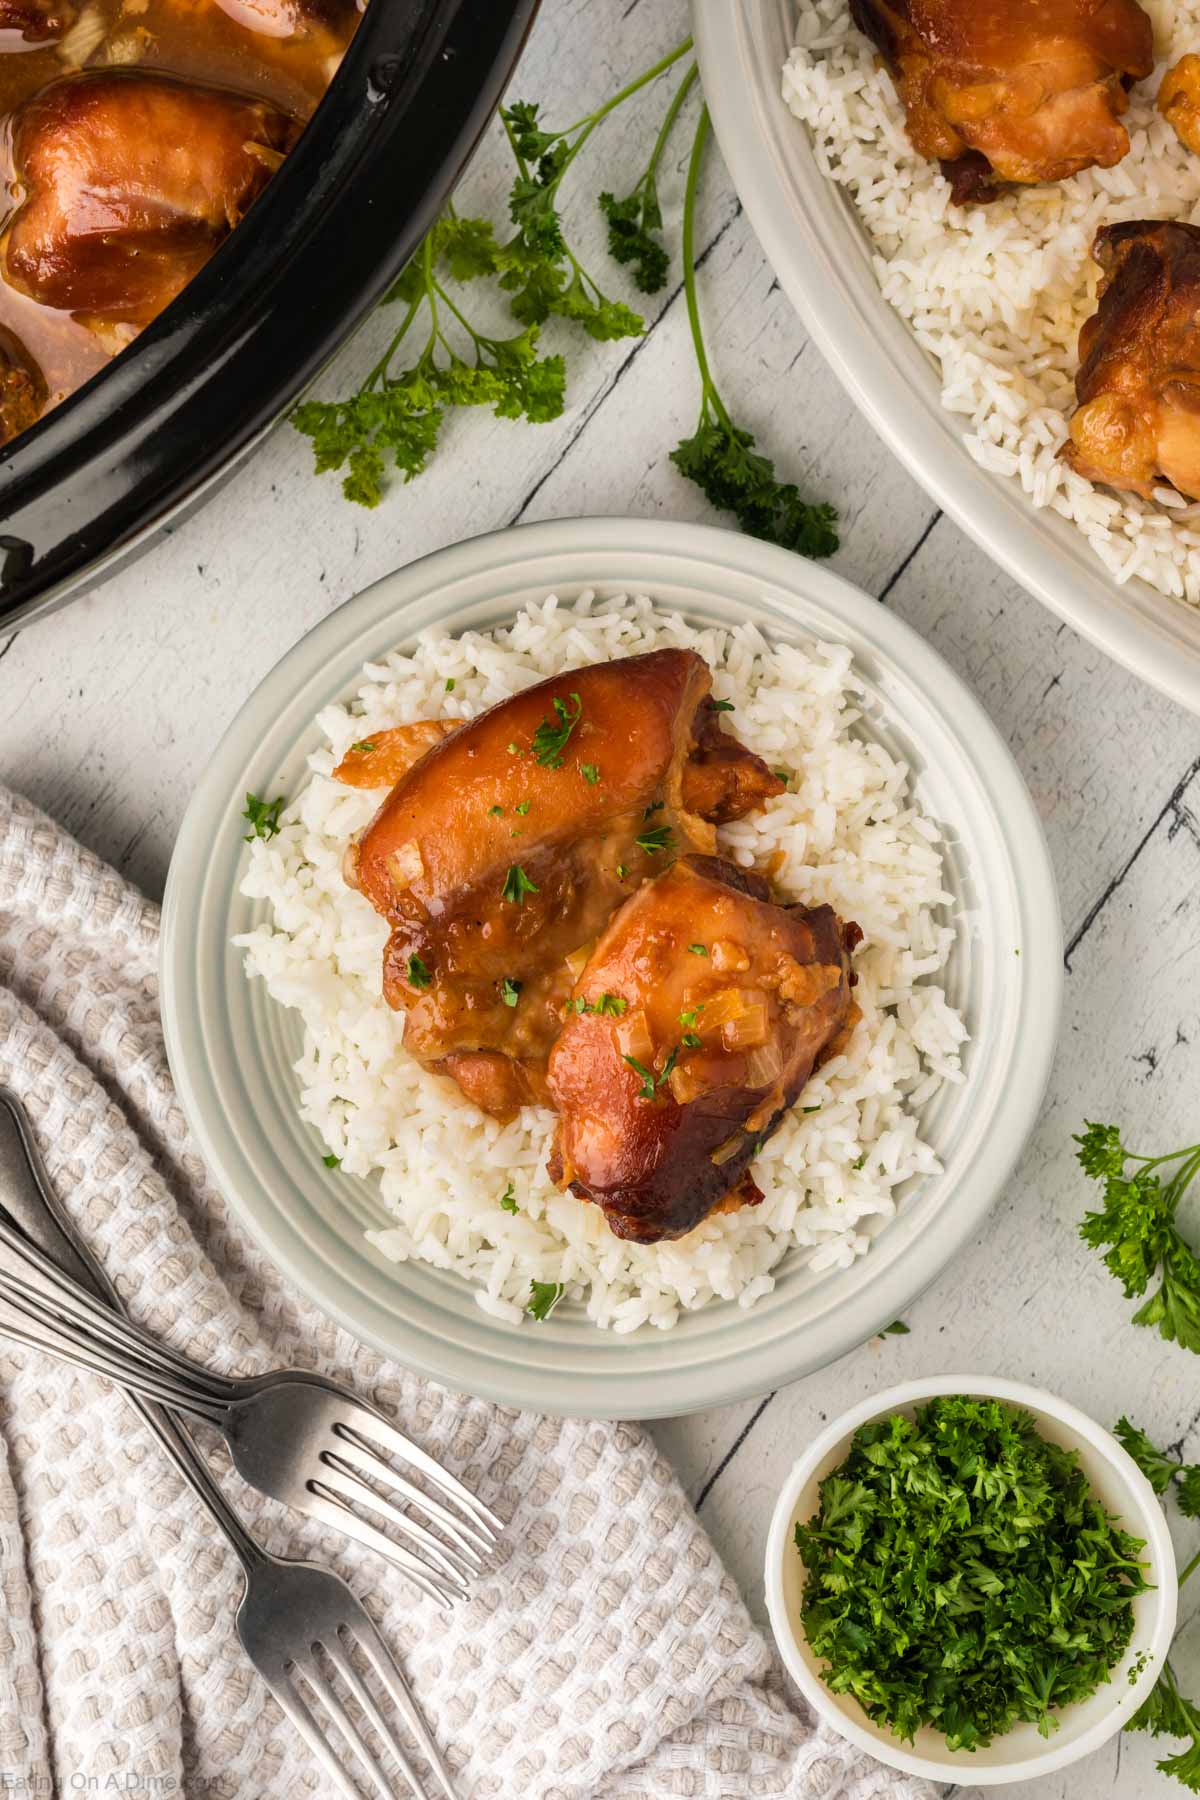 Apricot chicken thighs on white rice on a plate